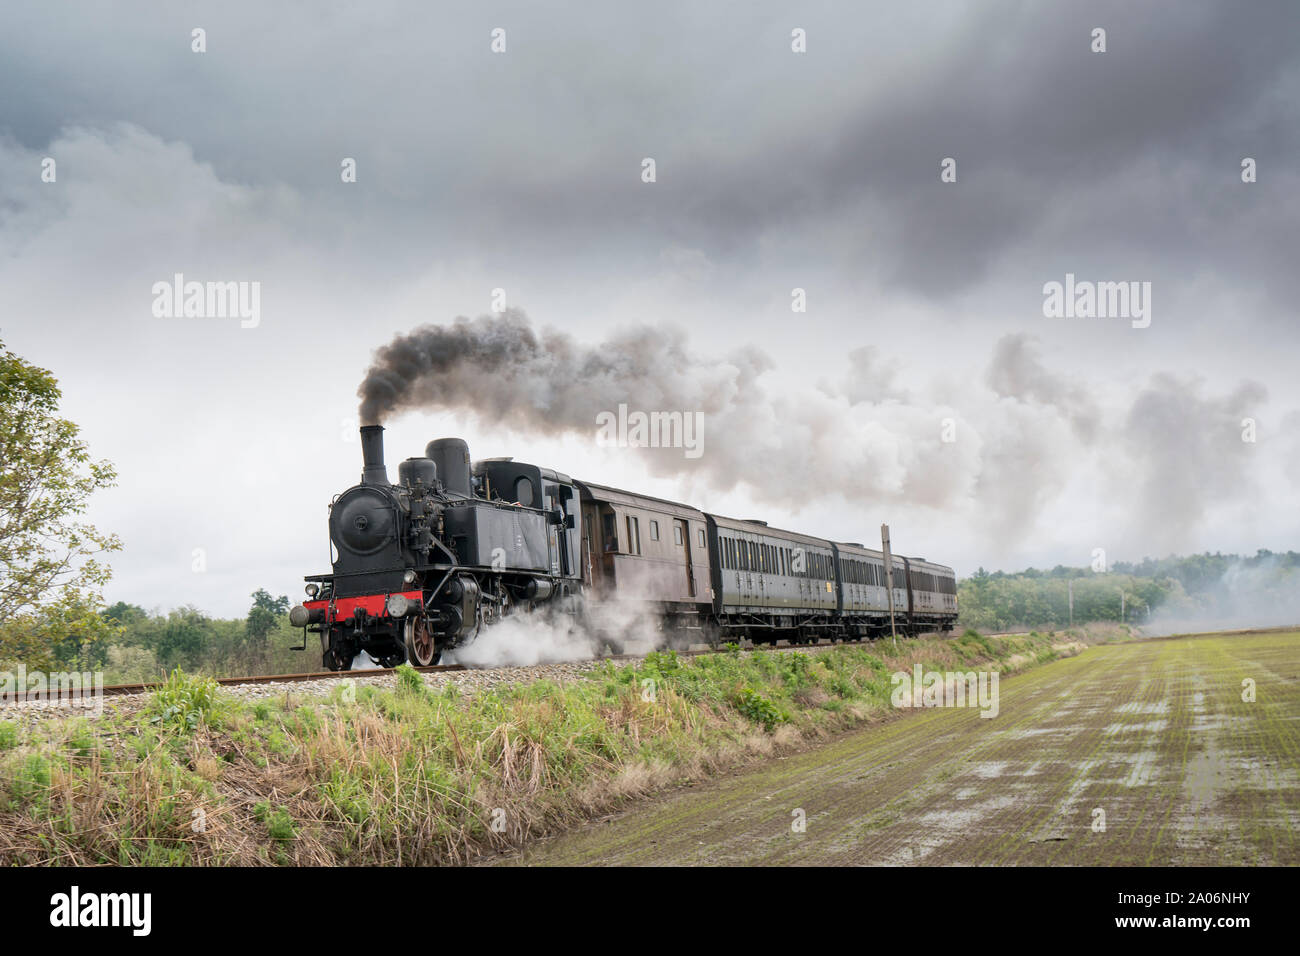 Vintage steam train with ancient locomotive and old carriages runs on the tracks in the countryside Stock Photo